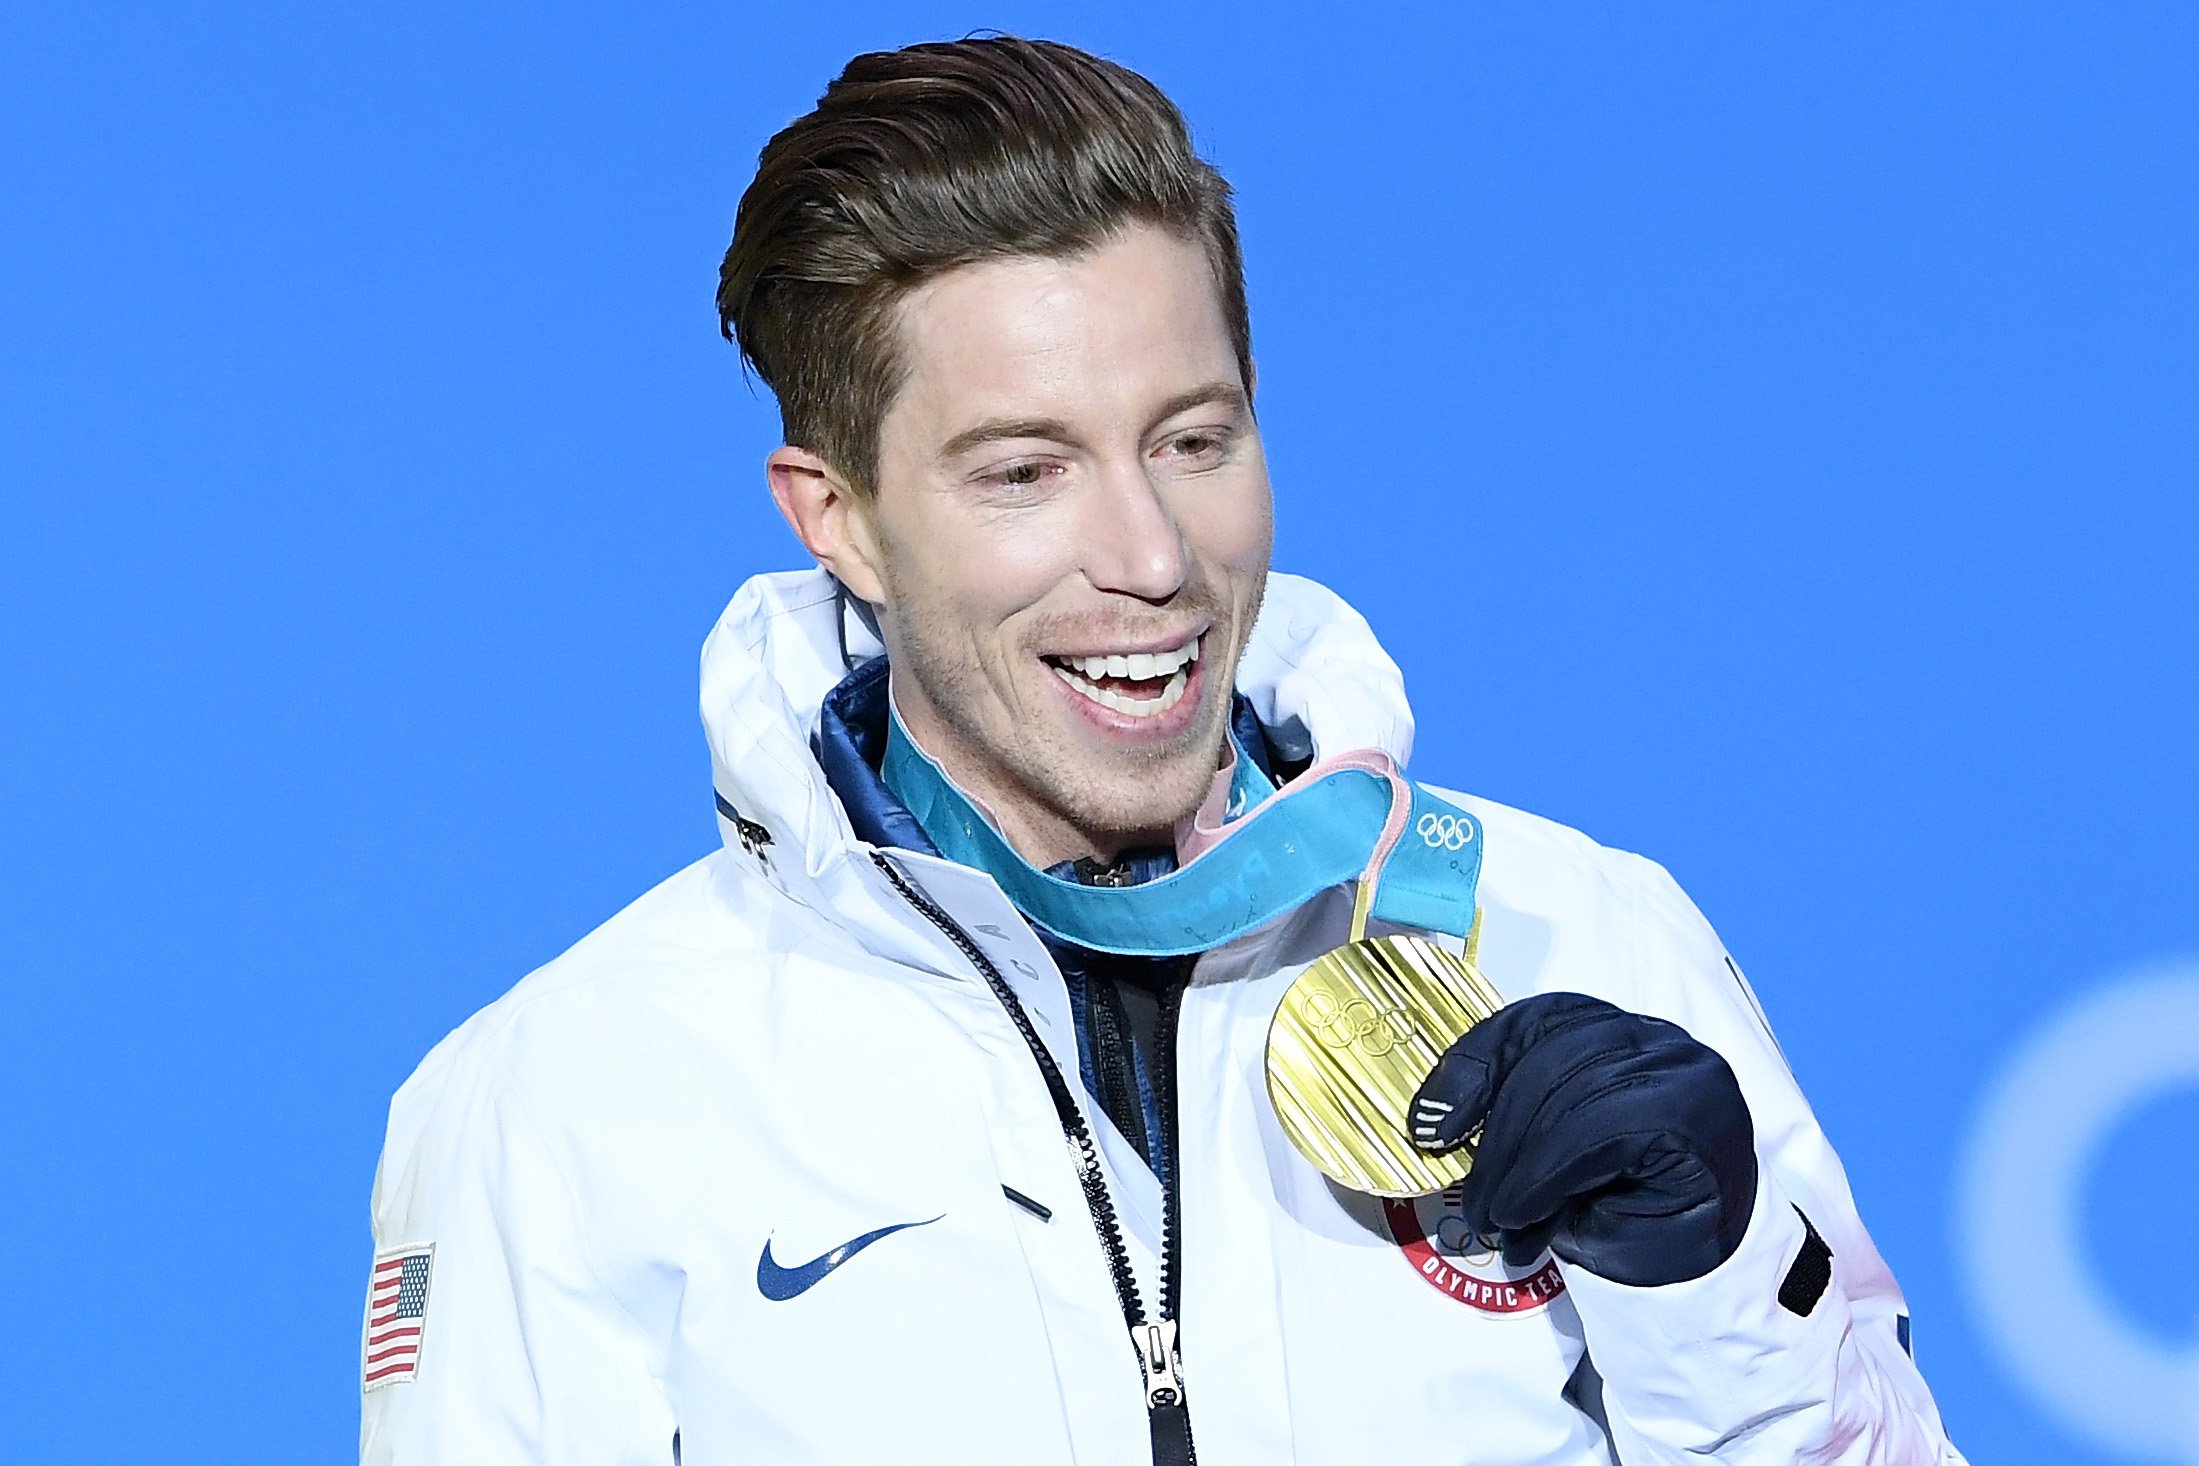 Shaun White needs a new nickname. Let's help him!